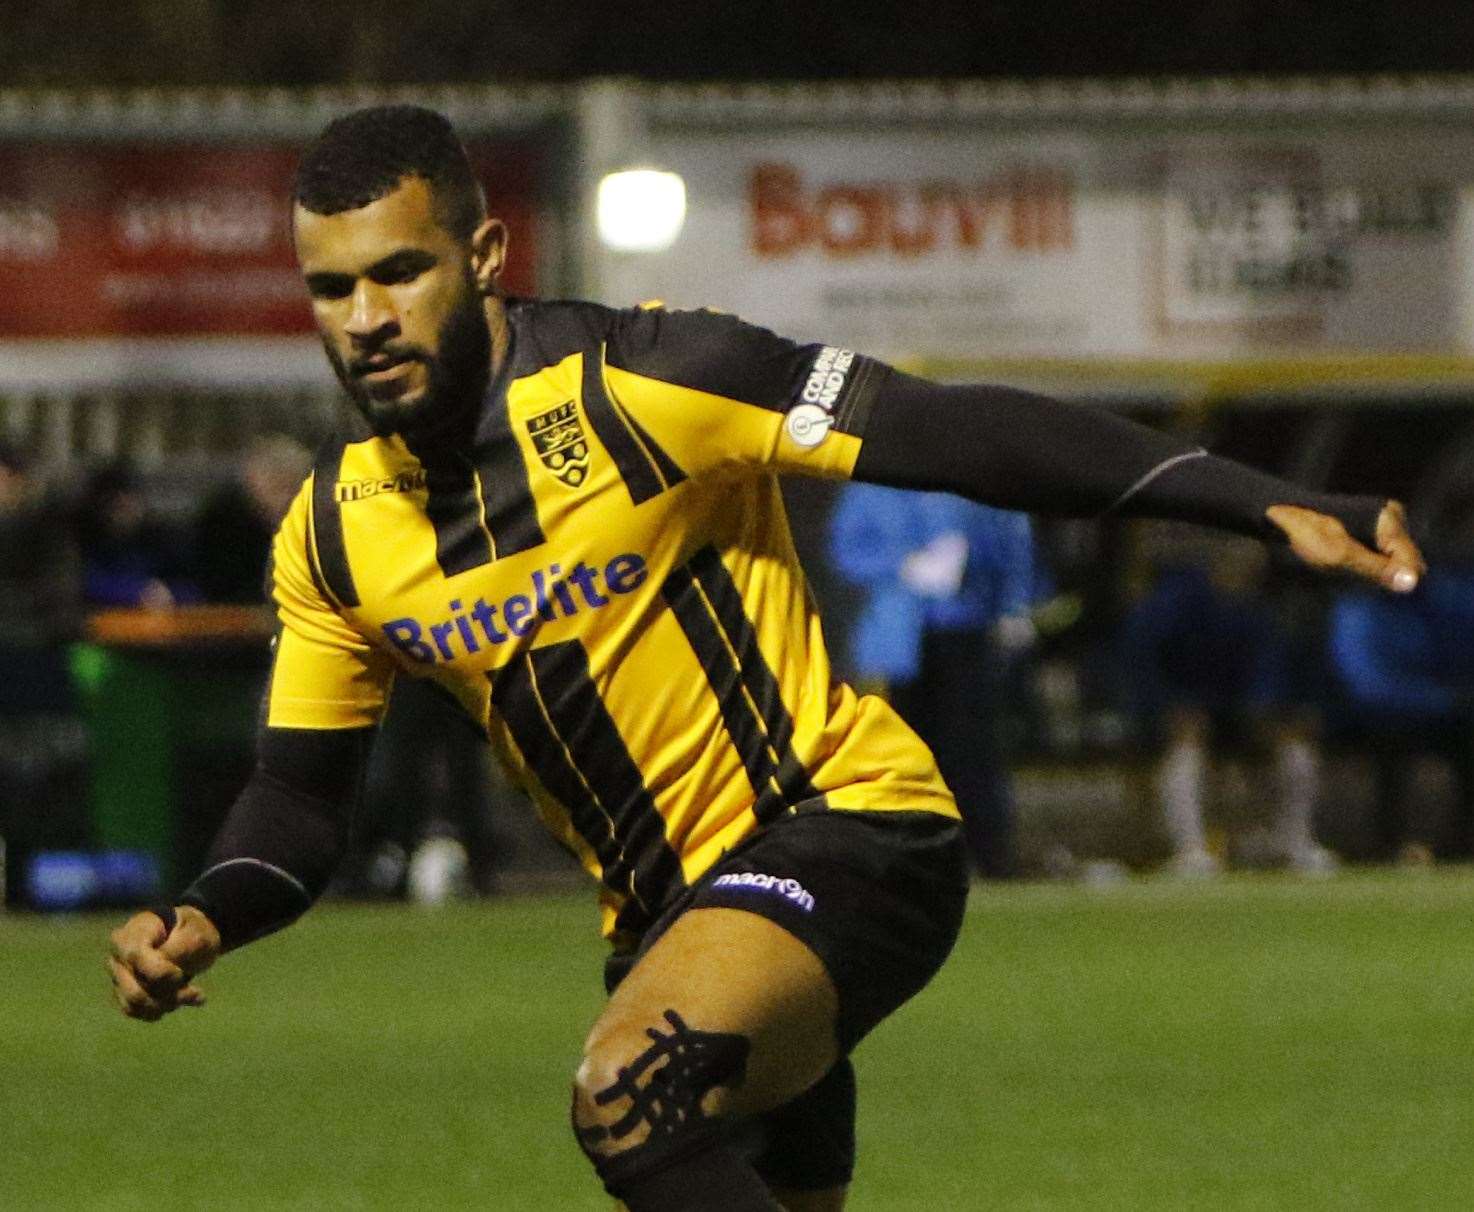 Dan Wishart scored one and made one for Maidstone at Hungerford Picture: Andy Jones